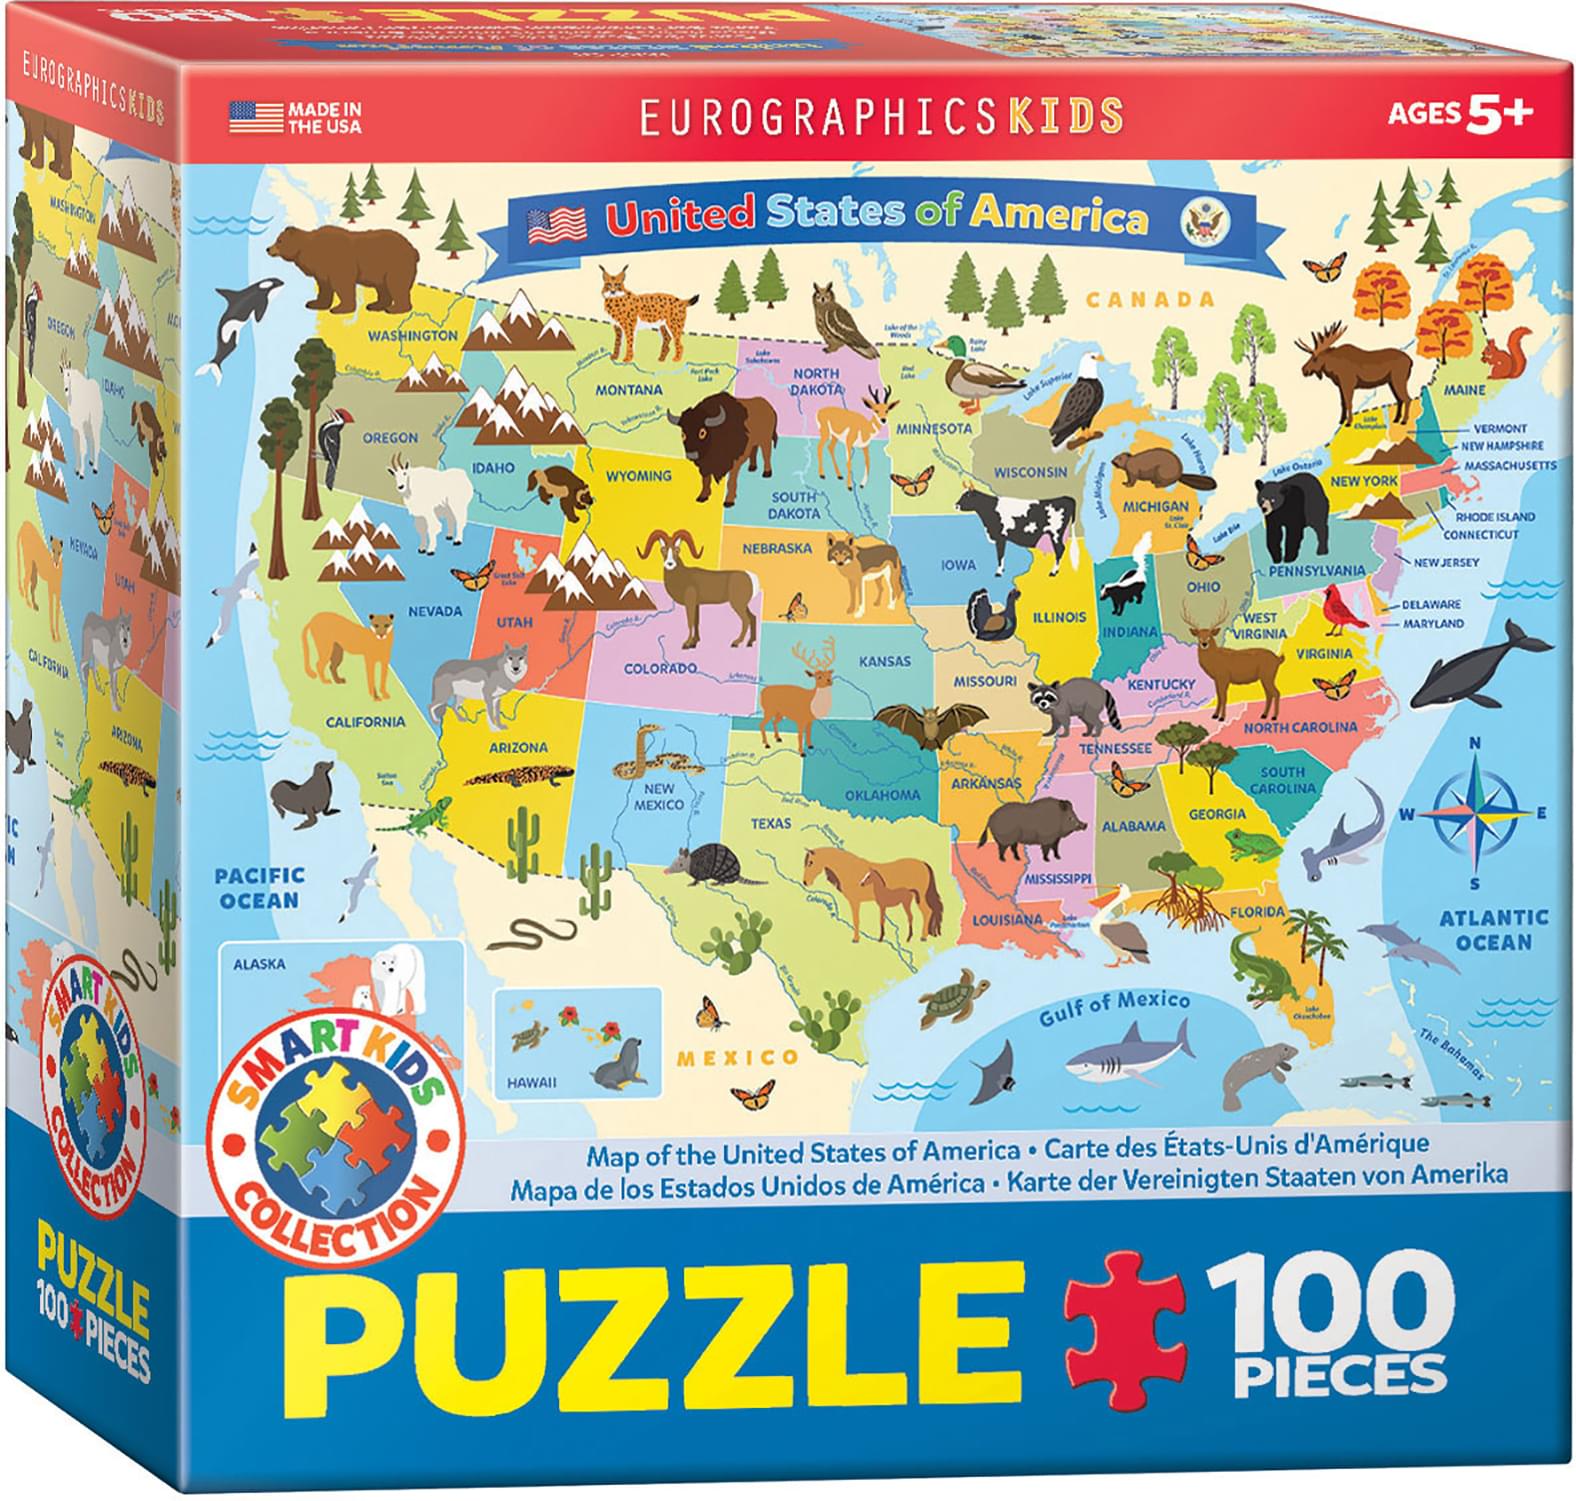 Illustrated Map of the United States of America 100 Piece Jigsaw Puzzle